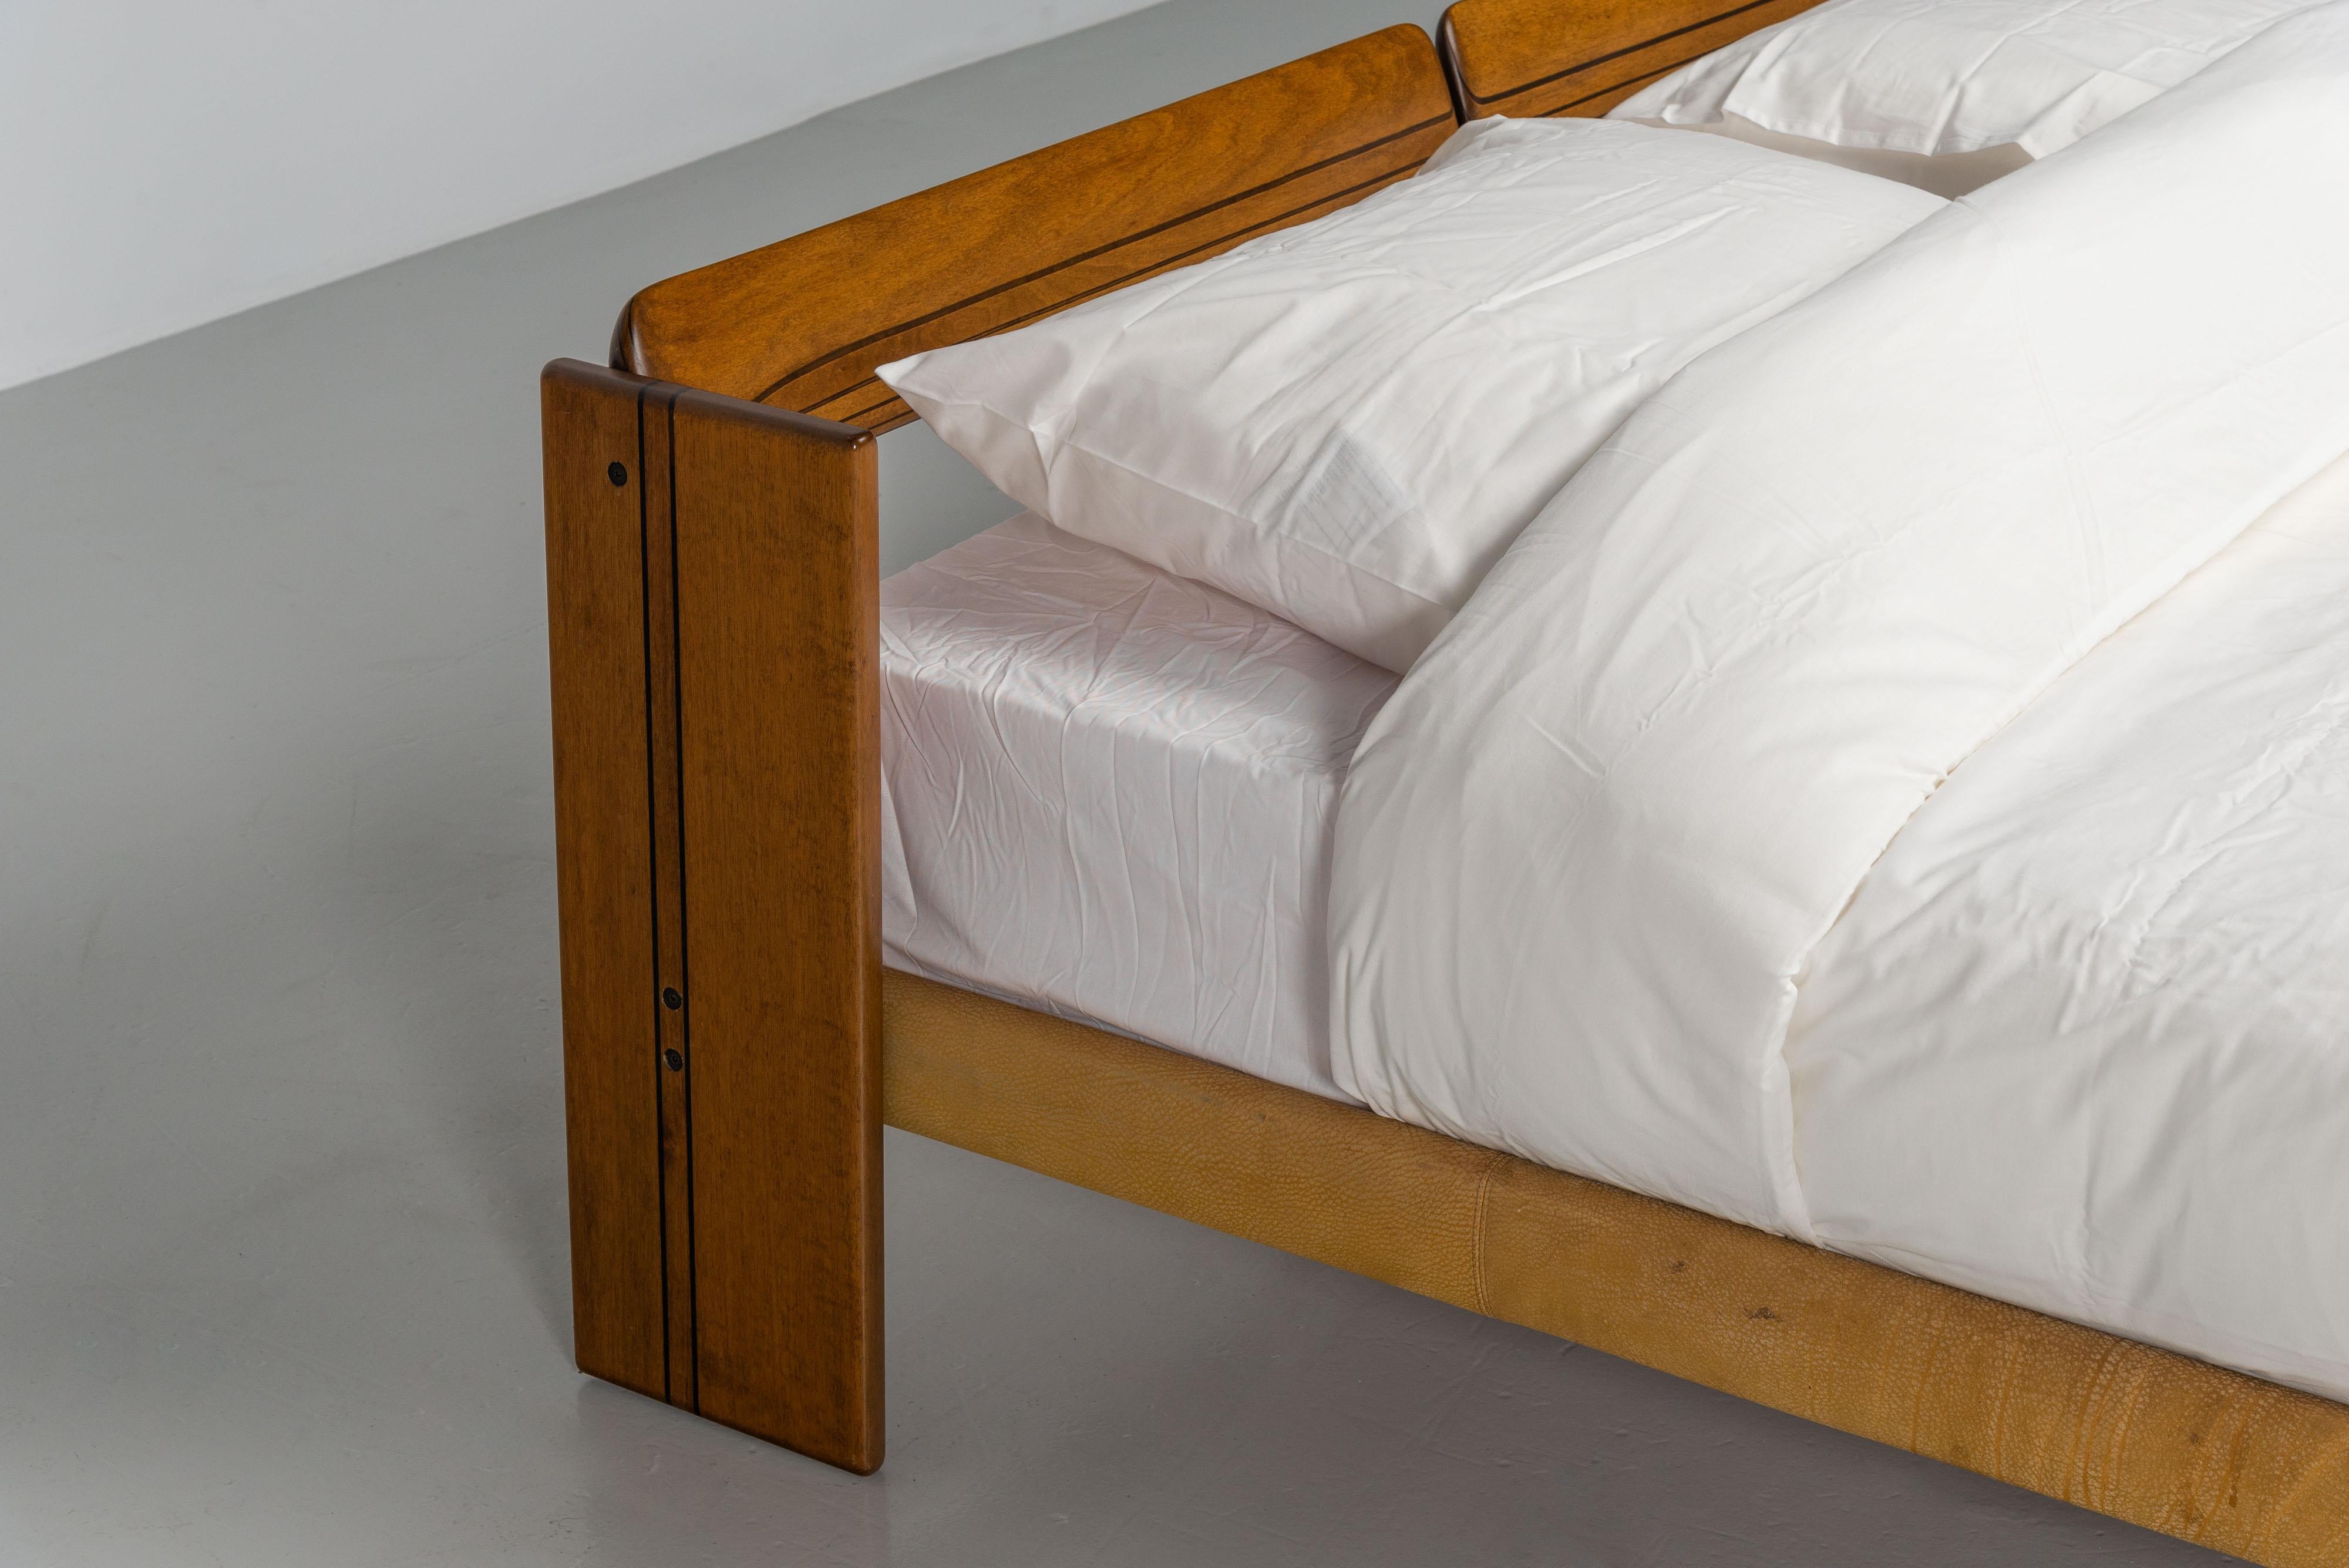 Amazing kingsized bed from the Artona series designed by Afra & Tobia Scarpa and manufactured by Maxalto in Italy in 1975. It's made from walnut wood with ebony details. This series is well-known for its fantastic woodwork and high quality. The